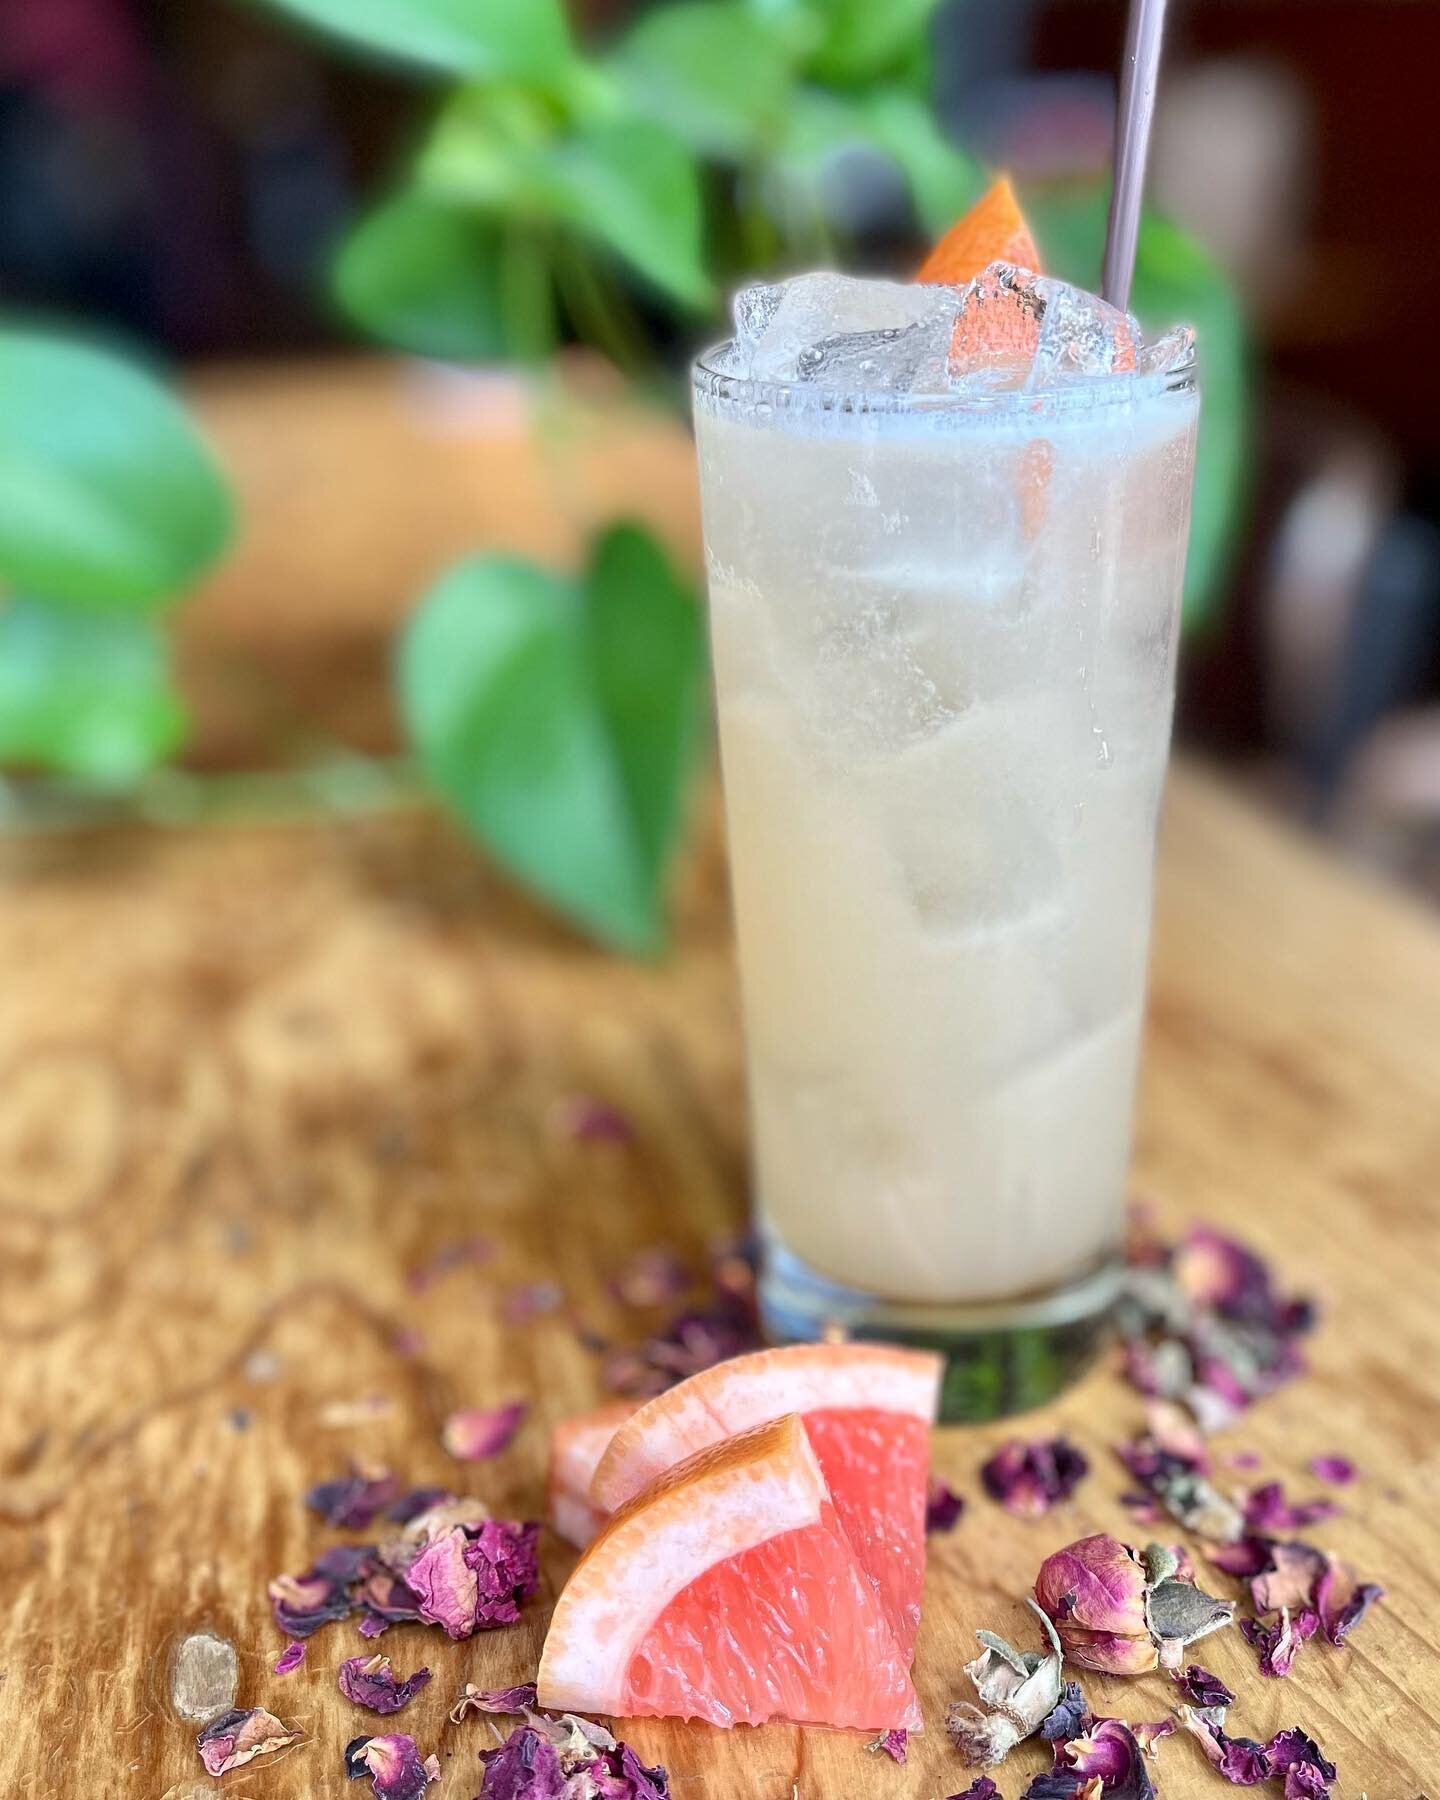 🎉NEW COCKTAIL🎉 
The whole world is a stage, and all the folks are merely players! Introducing&hellip;
CURTAIN CALL!
This cocktail is literally summer in a glass! The Curtain Call features;
Vodka, St. Germain, Yuzu liqueur, grapefruit, lemon and ros